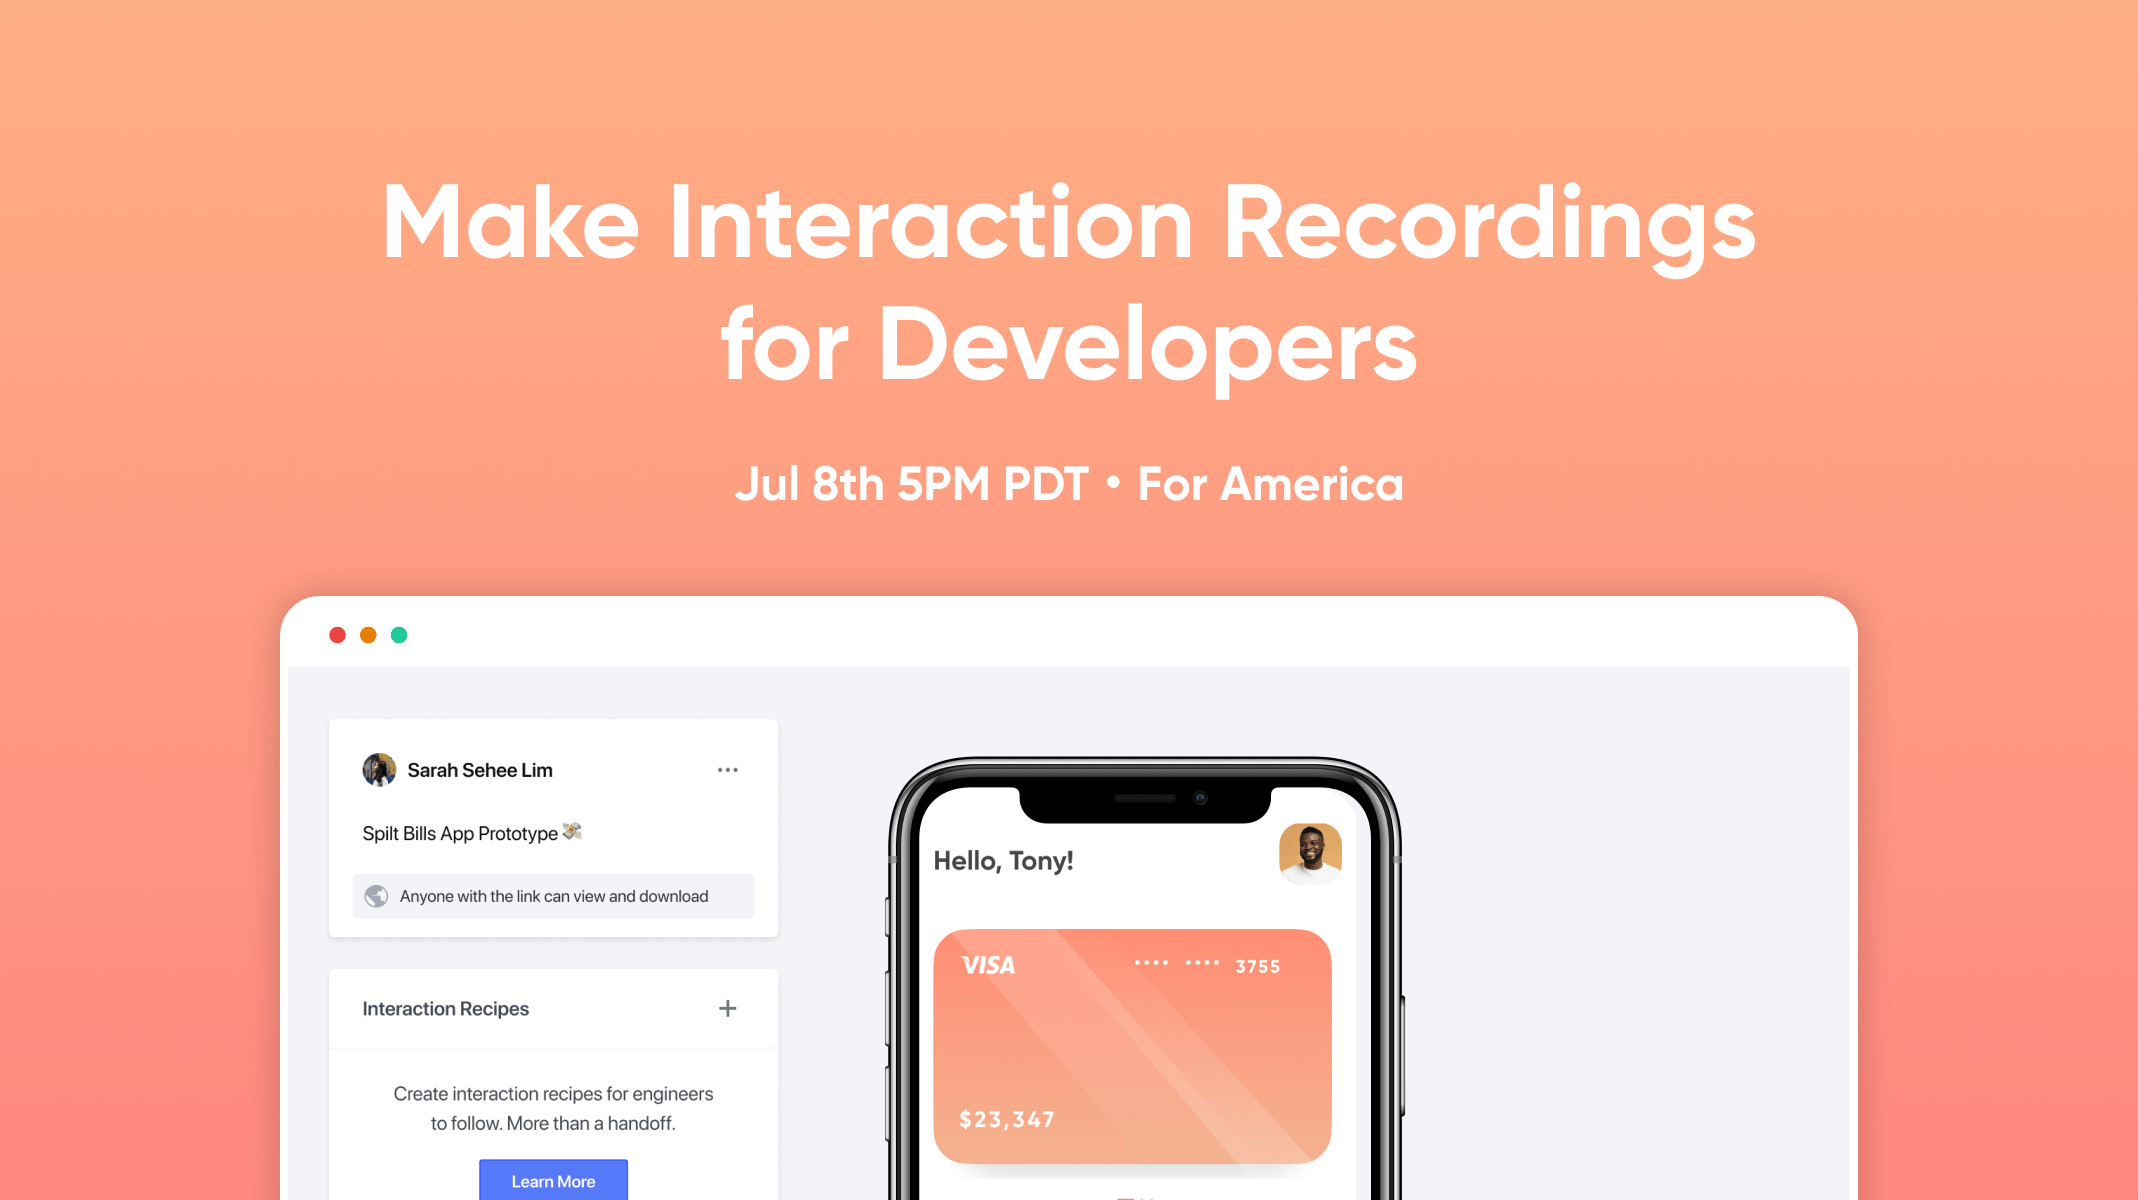 Make Interaction Recordings for Developers workshop thumbnail